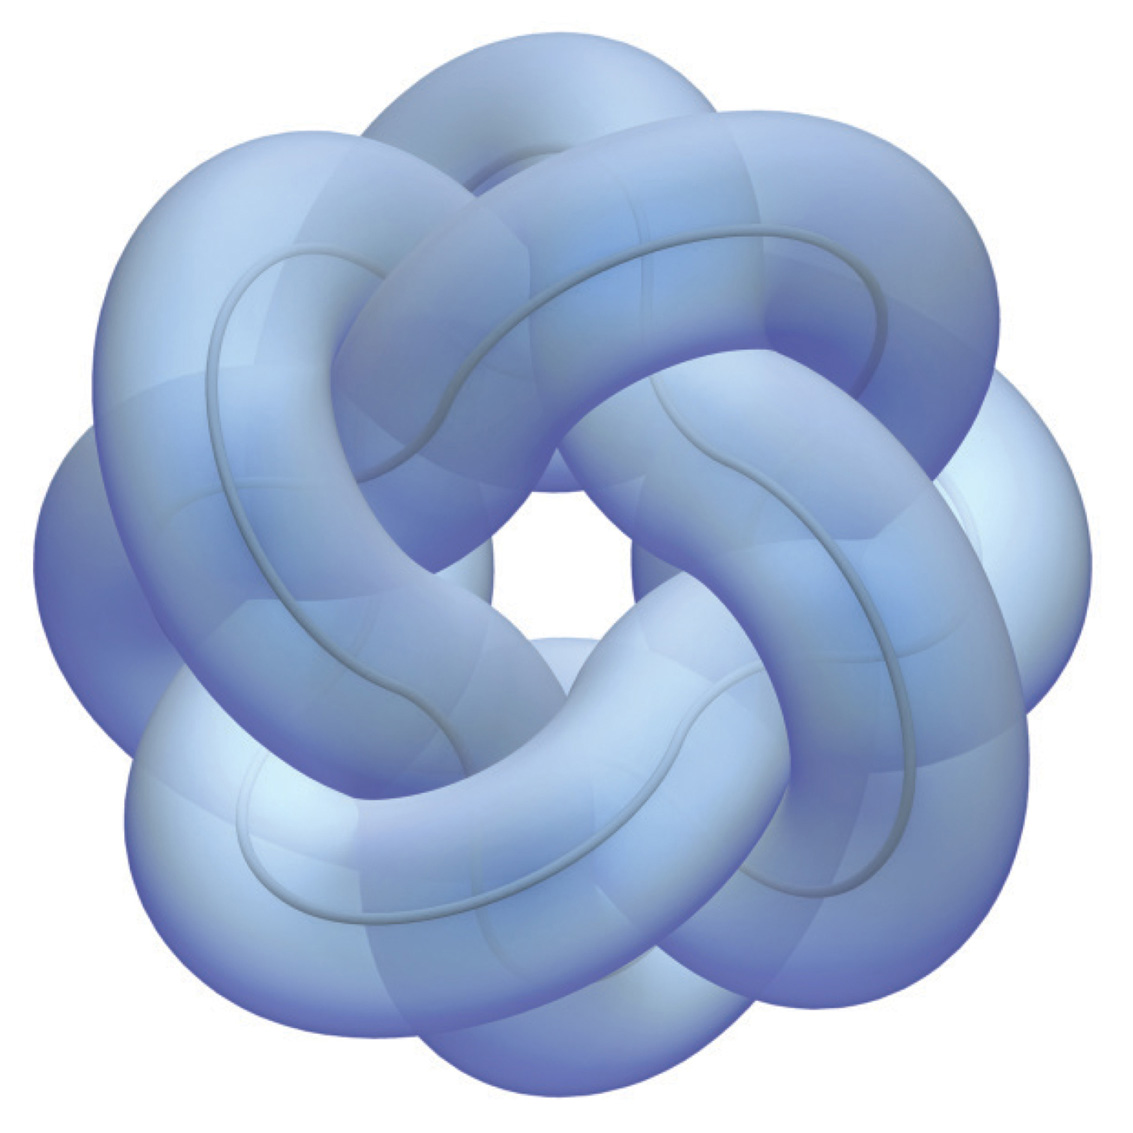 
sub {
vertical-align: sub;
font-size: smaller;
}
 
Representation of the 818 knot as rendered by Jason Cantarella with Ted Ashton, Michael Piatek, and Eric Rawdon.